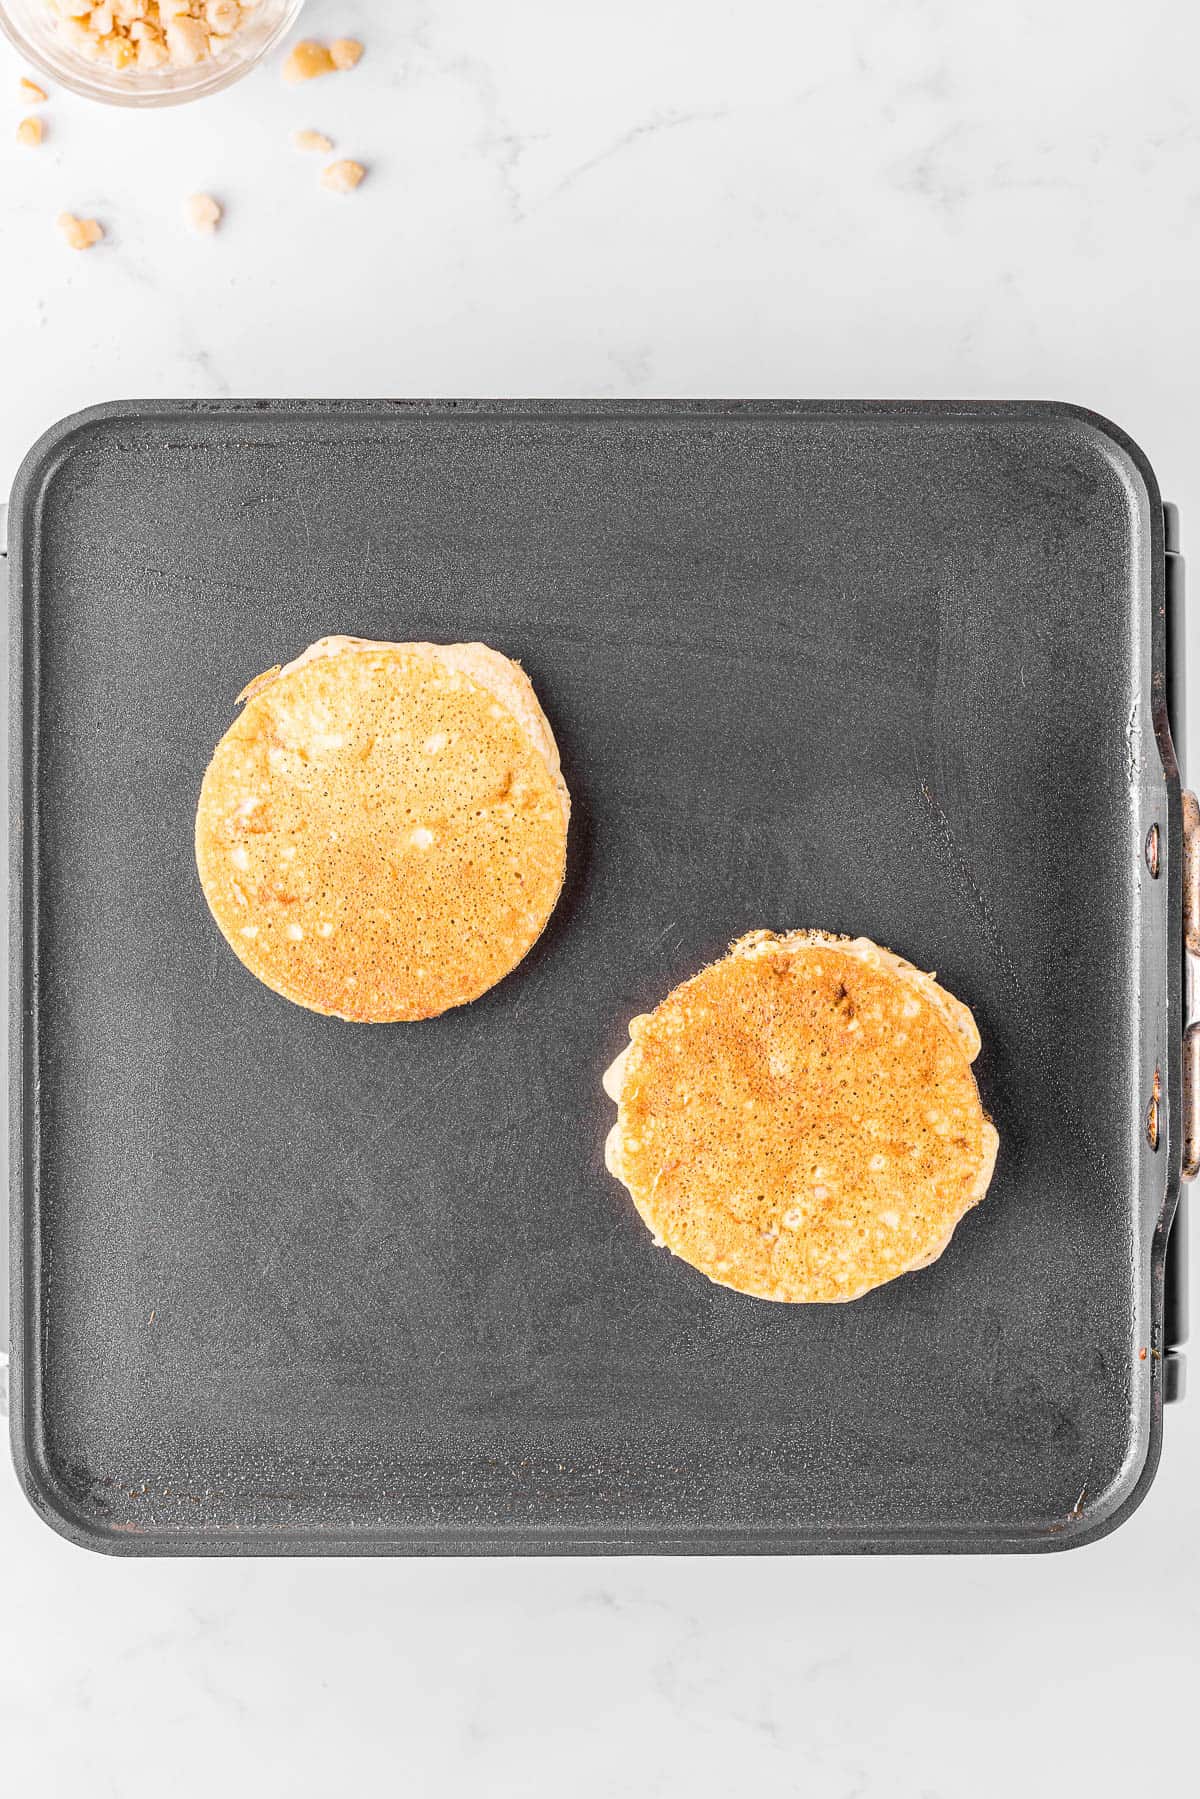 two Fluffy banana pancakes cooking on hot griddle.